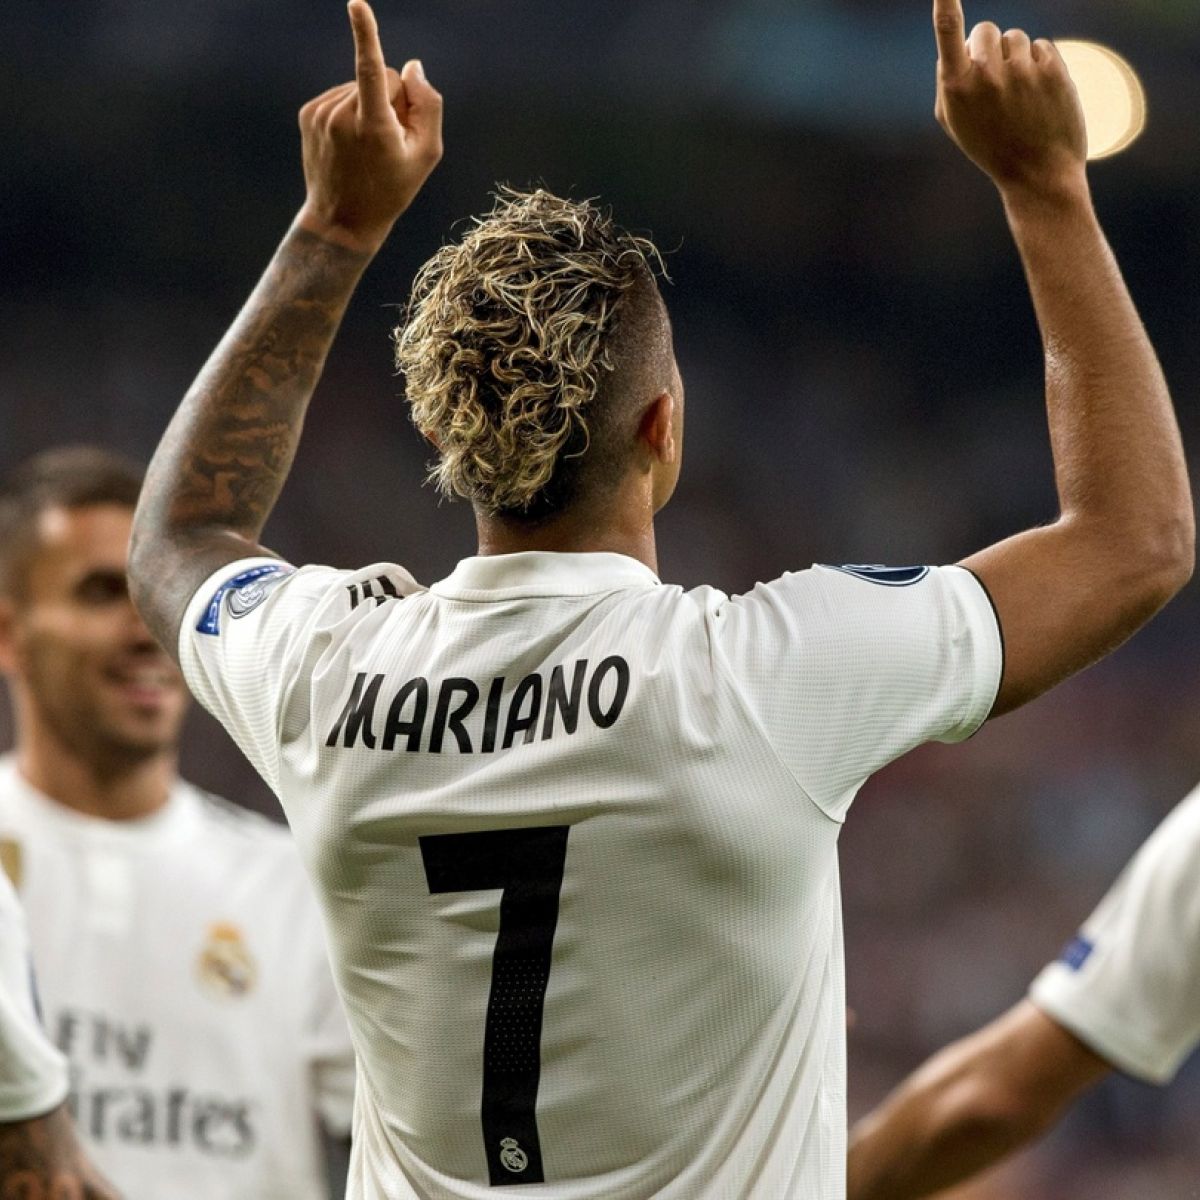 mariano jersey number